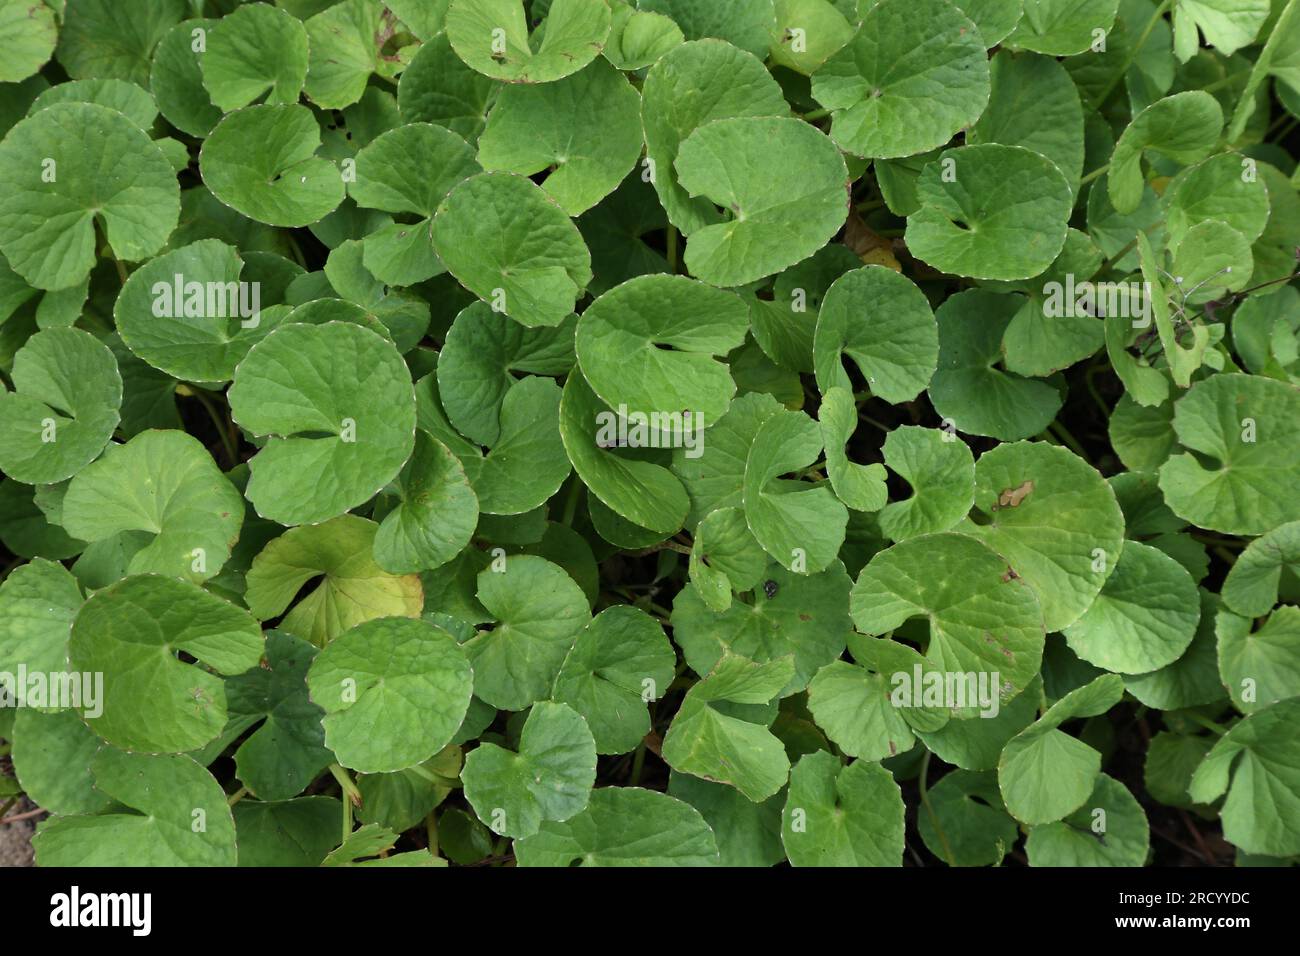 Overhead view of the Asiatic pennywort (Centella Asiatica) leaves growing in the garden Stock Photo